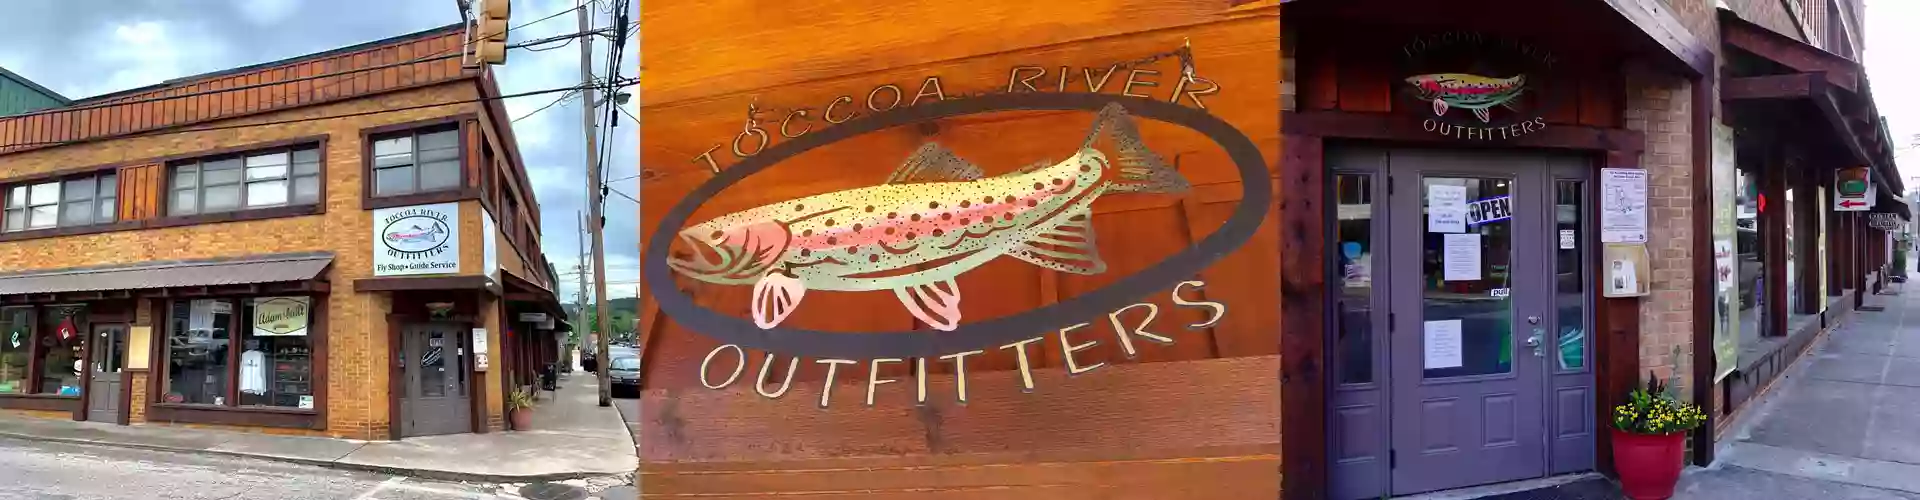 Toccoa River Outfitters & Fly Shop